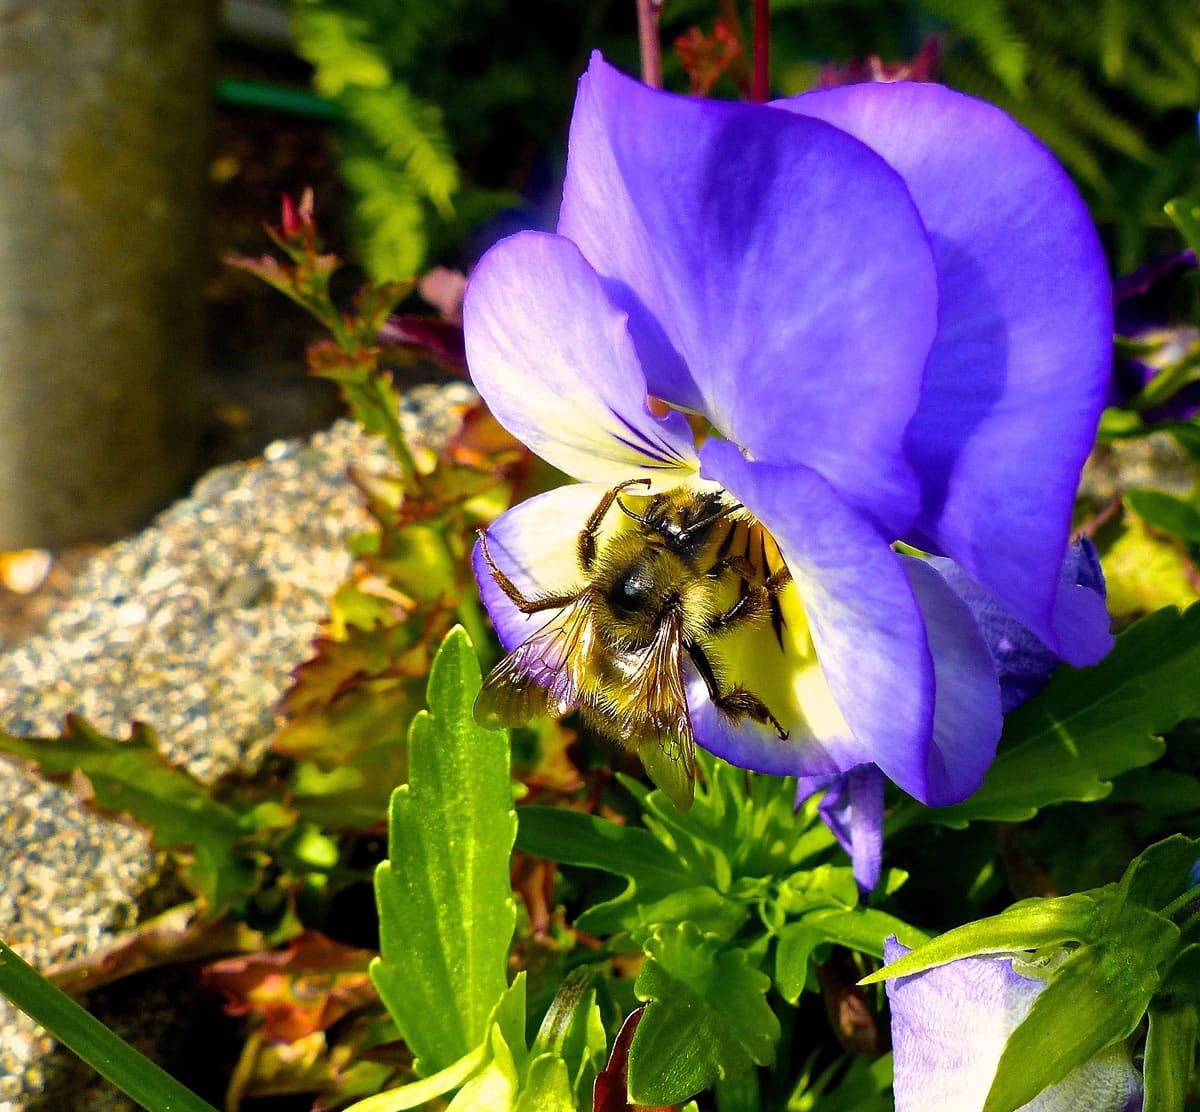 A bumblebee gathering pollen from a pansy-filled pot near Langley. Changing land use, viruses and pesticides are causing massive pollinator losses. Restoring the honeybee population is drawing the most emphasis but native bee species also are disappearing.